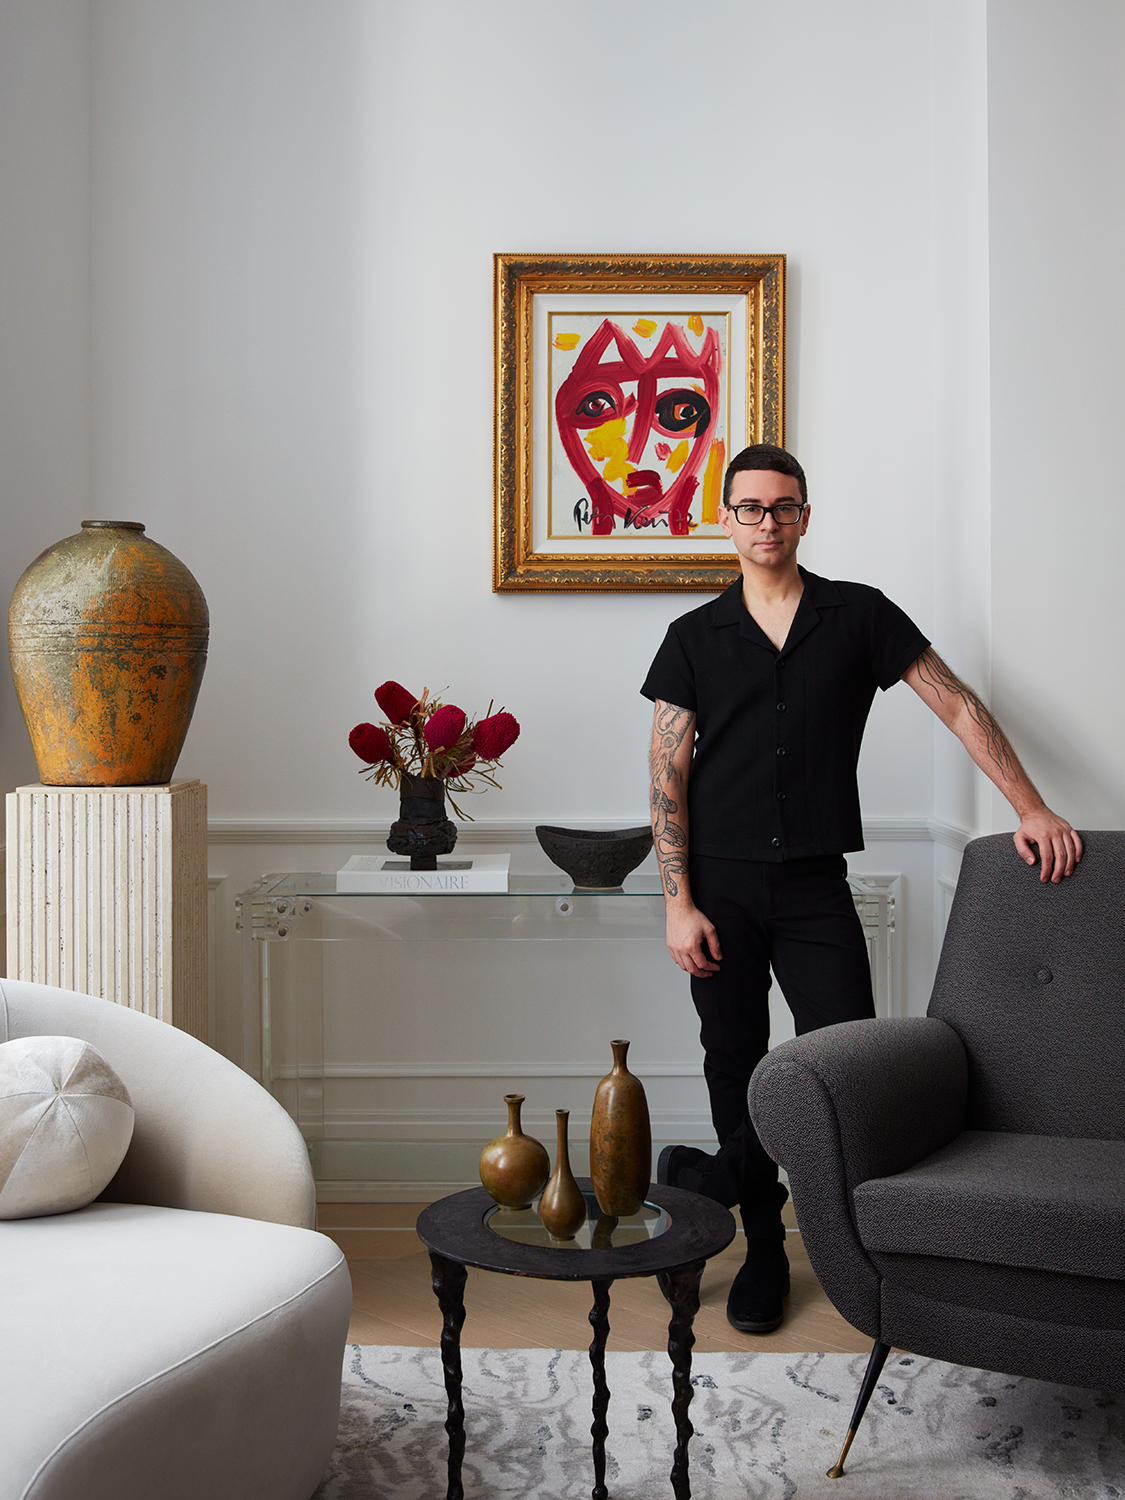 Christian Siriano’s One-Bedroom NYC Apartment Has 14 Chairs and a Whole Lot of Vintage Treasures